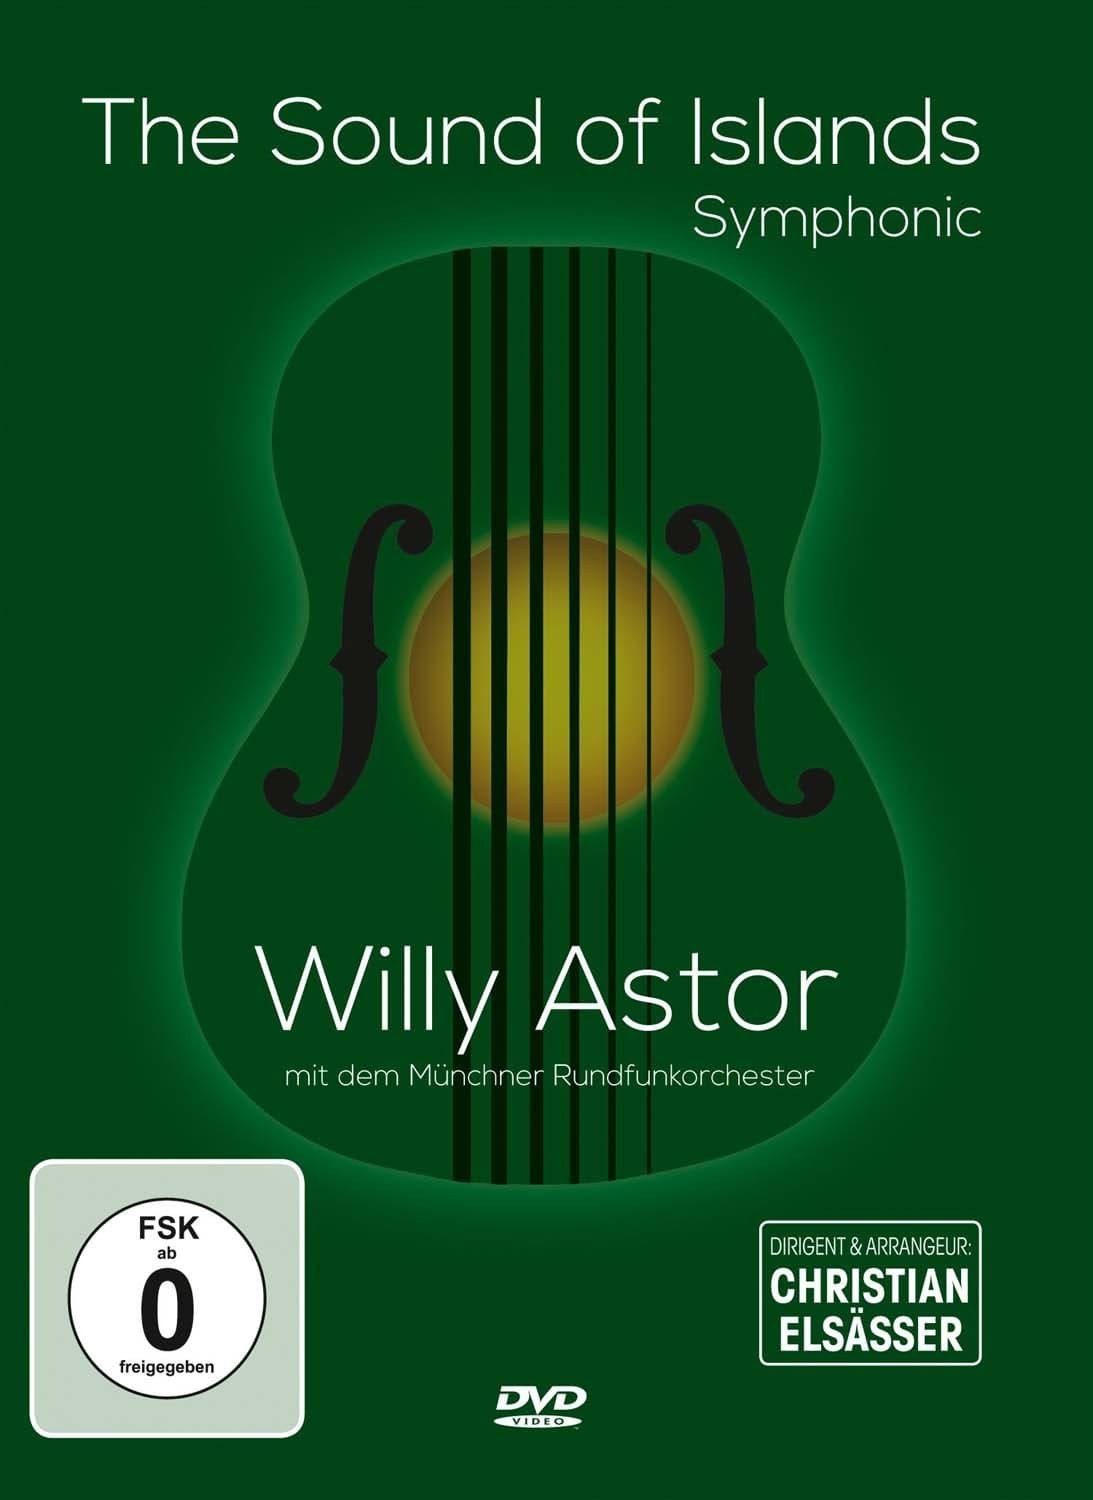 Willy Astor - The Sound Of Islands - Symphonic